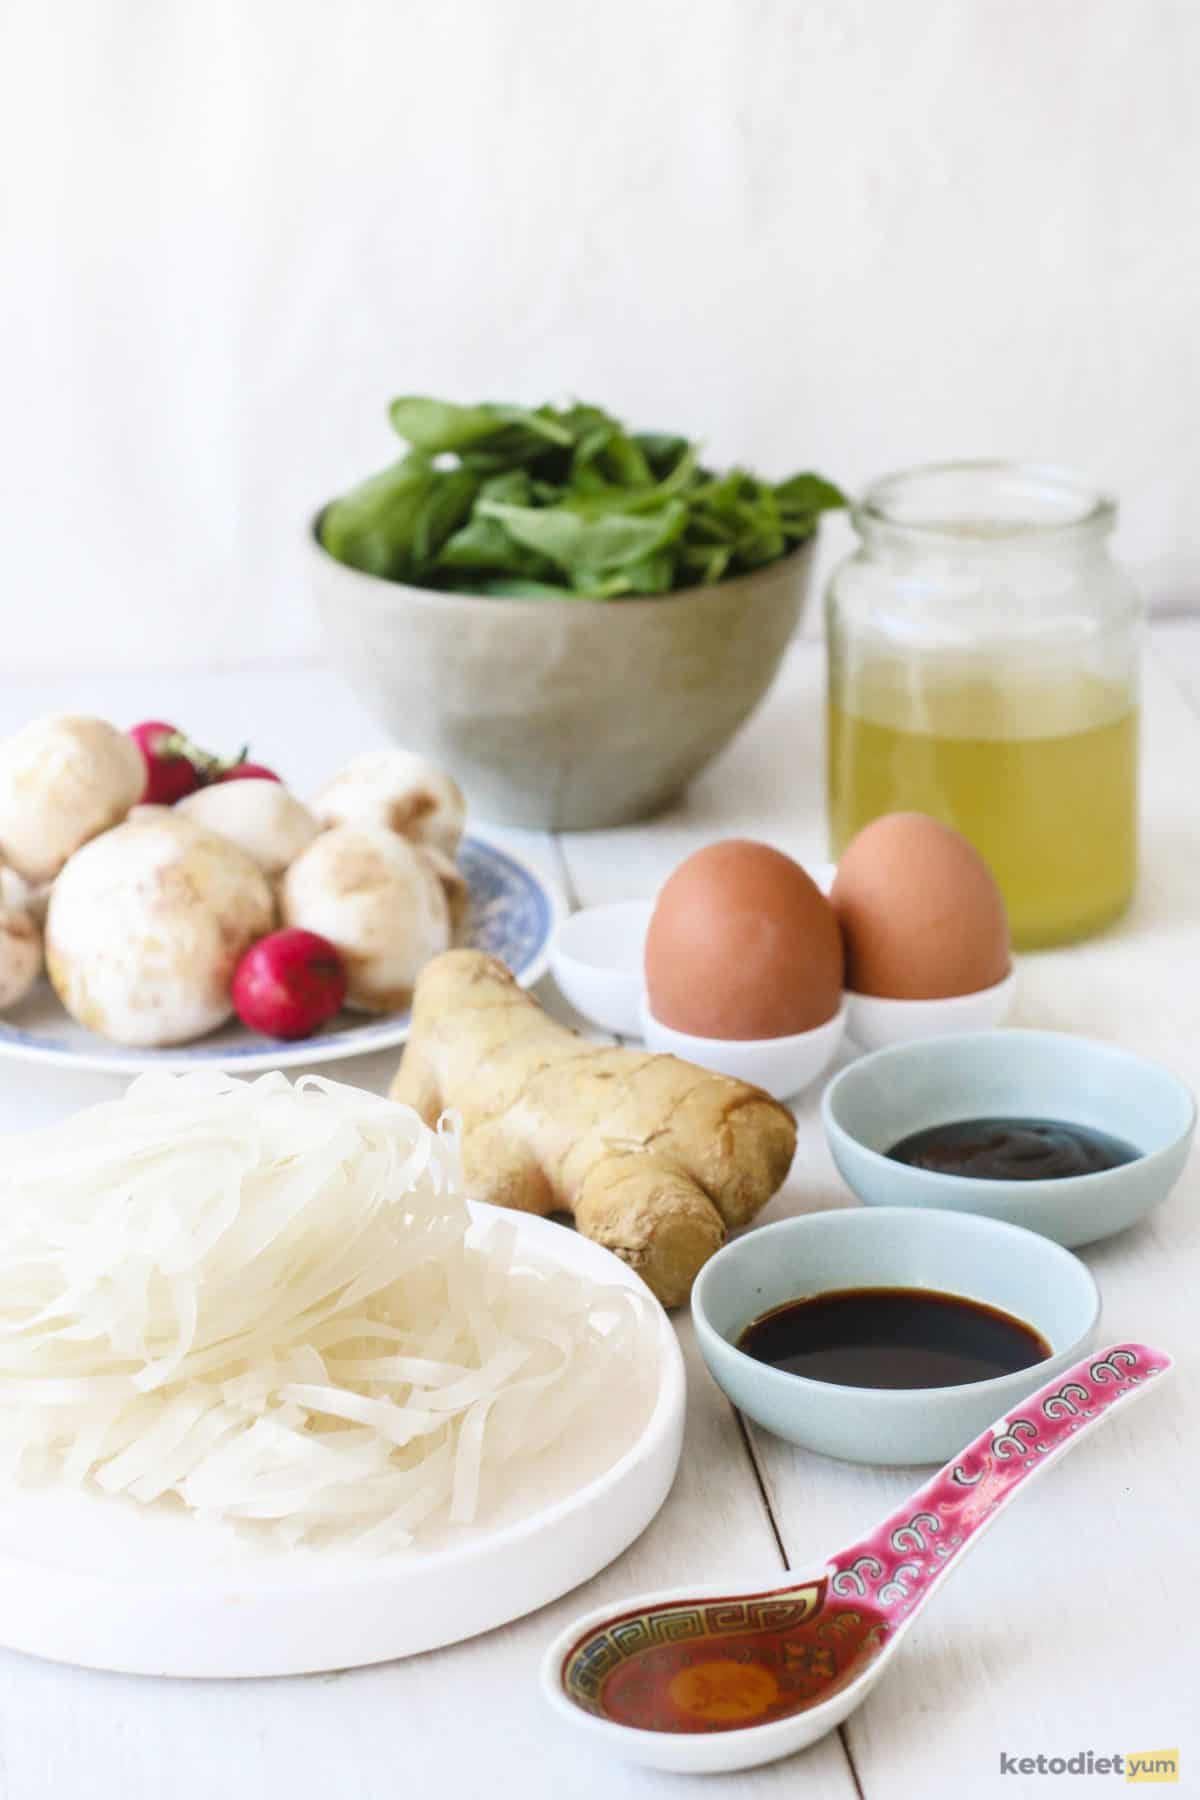 Ingredients arranged on a table to make keto ramen including shirataki noodles, spinach, button mushrooms, eggs, chicken broth, soy sauce and sesame oil